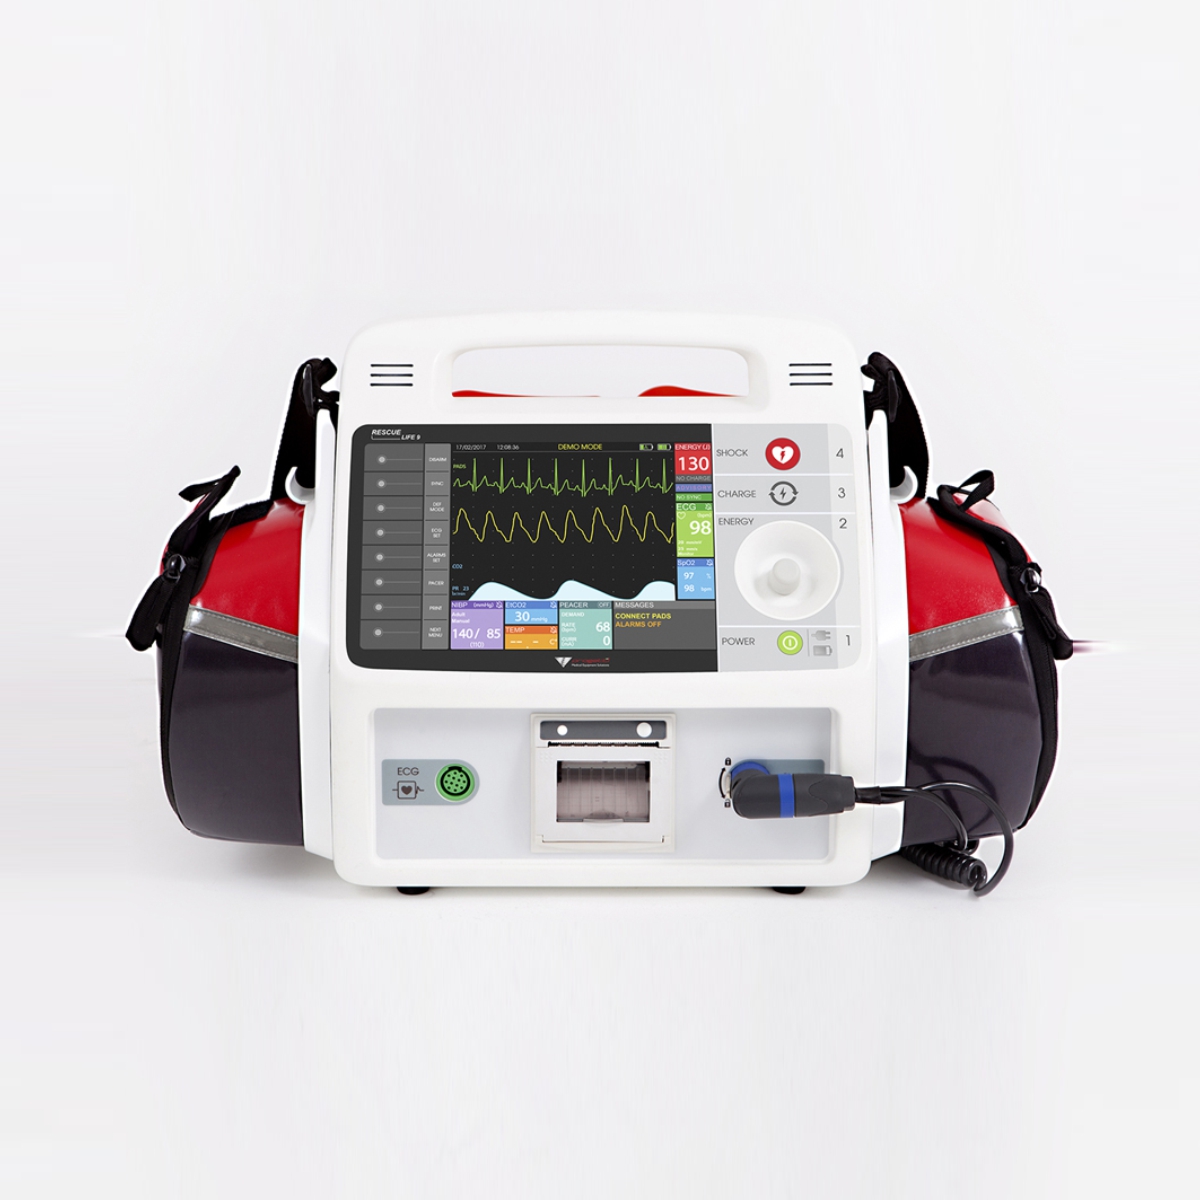 RESCUE LIFE 9 AED DEFIBRILLATOR with Temp, Spo2, Pacemaker